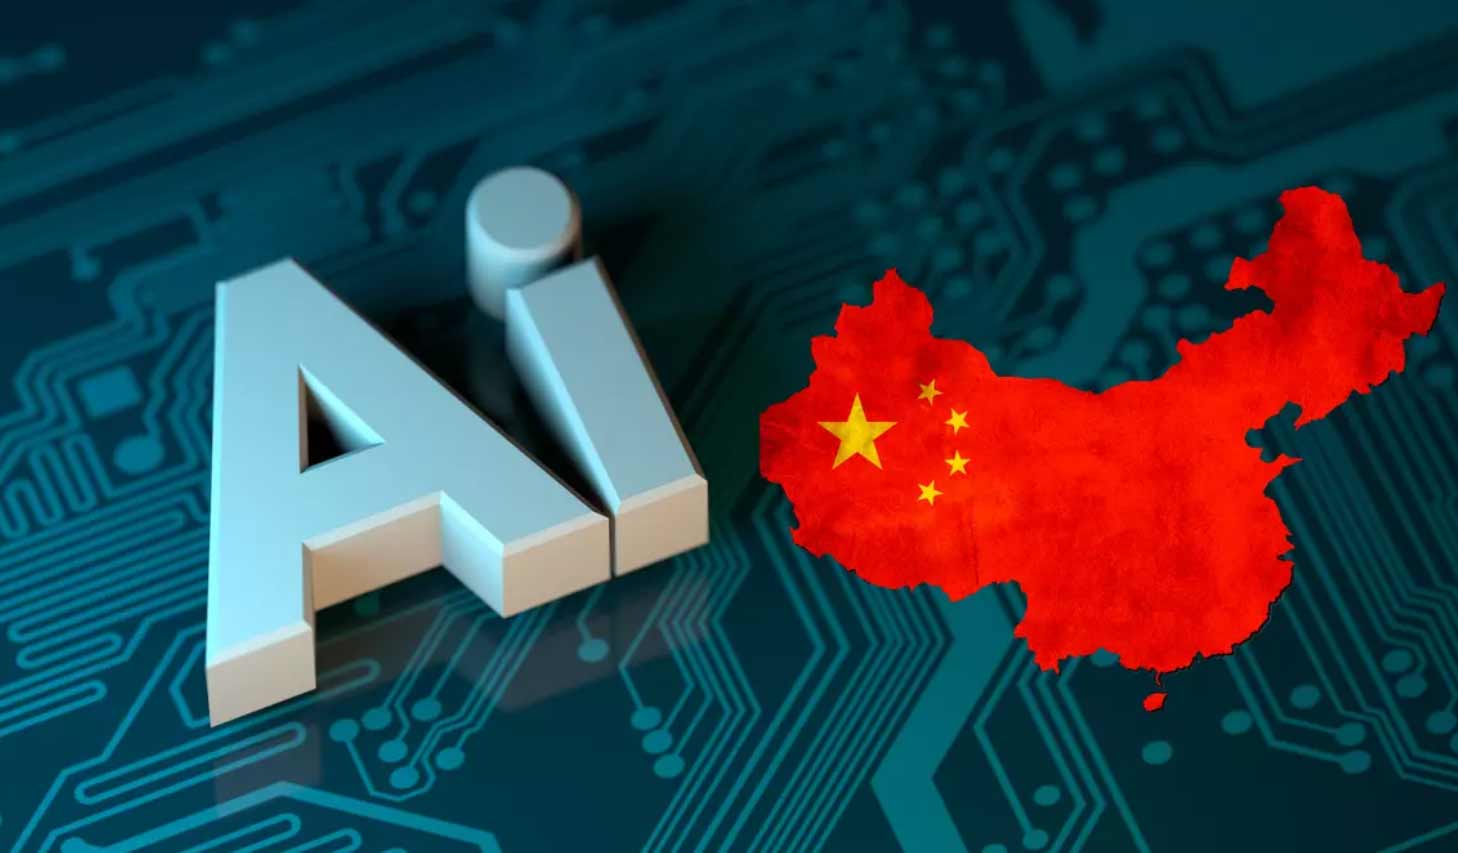 Chinese AI-Related Firm Zhipu Says it has Raised Over $341.8 mln This Year